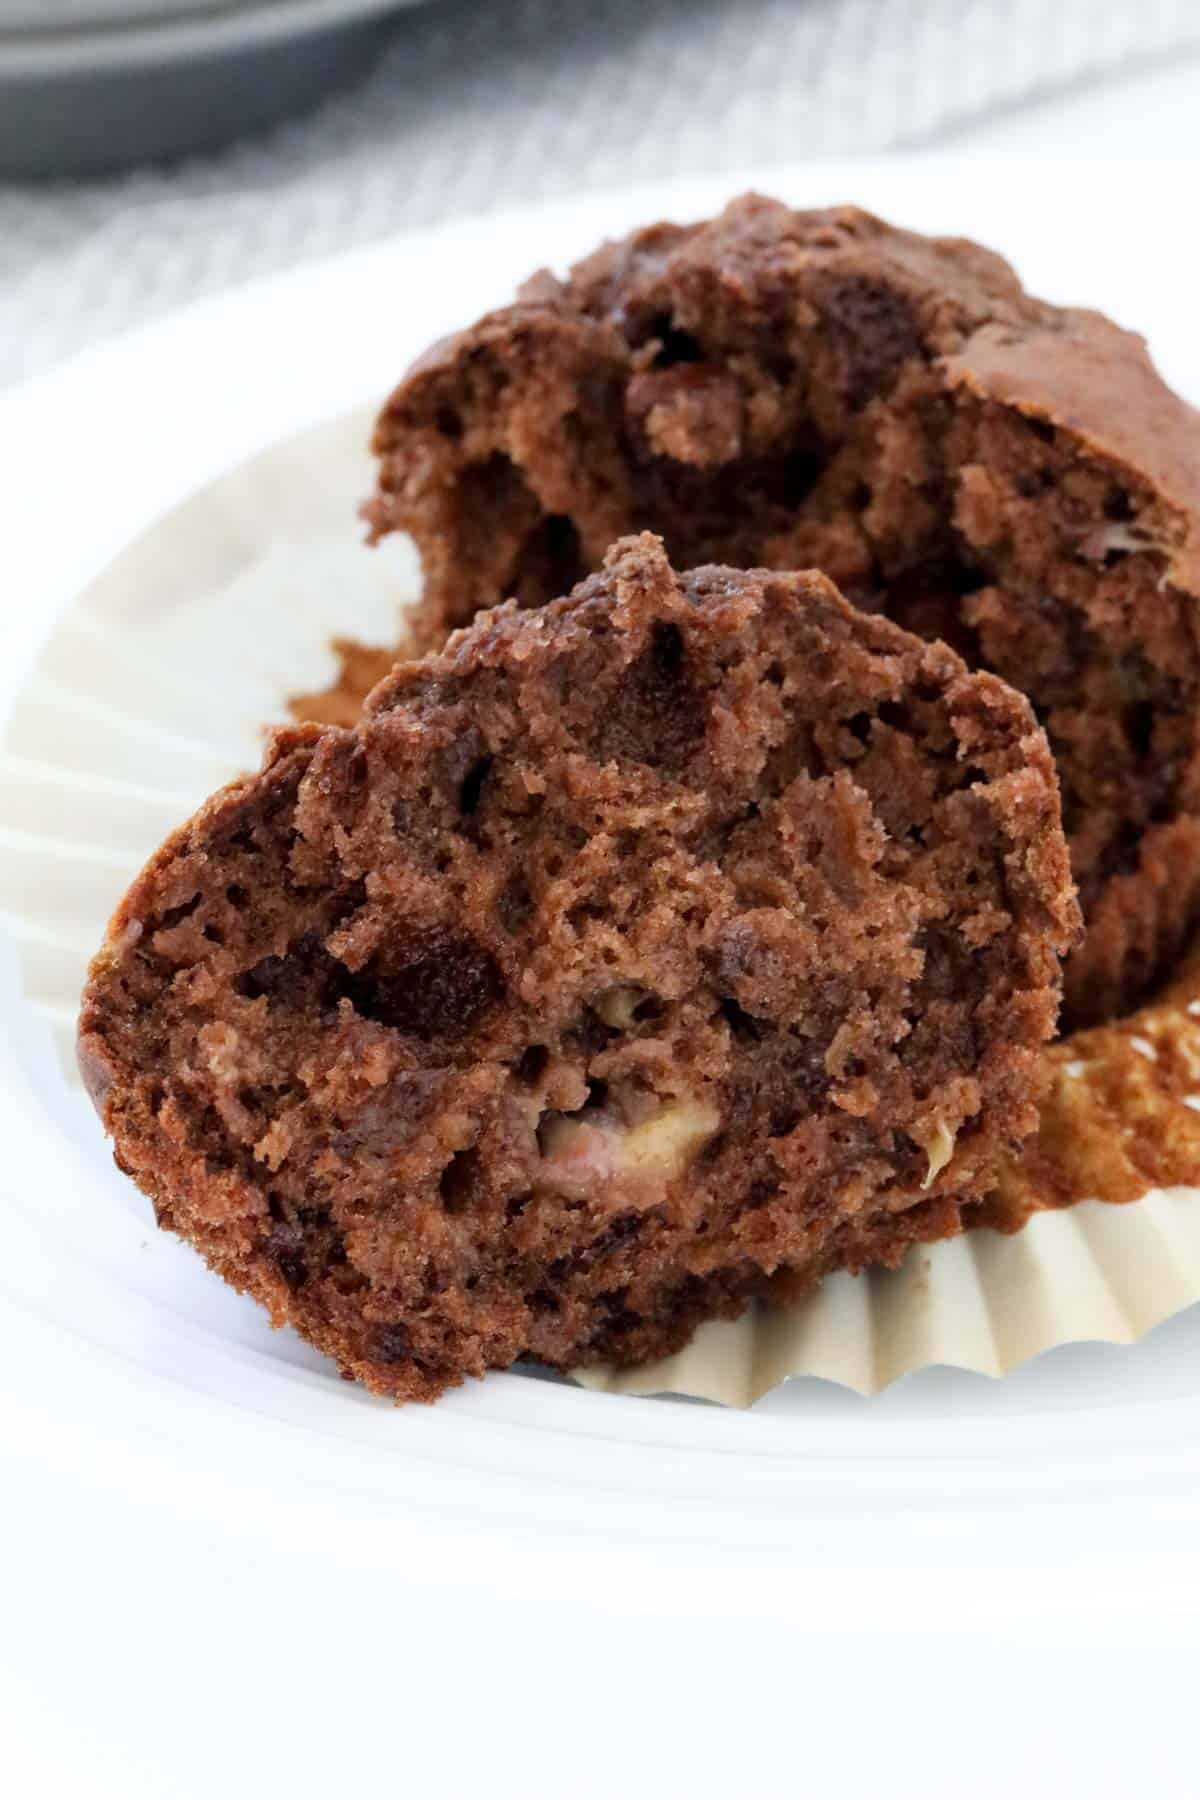 A double chocolate muffin split in half to show the texture inside.